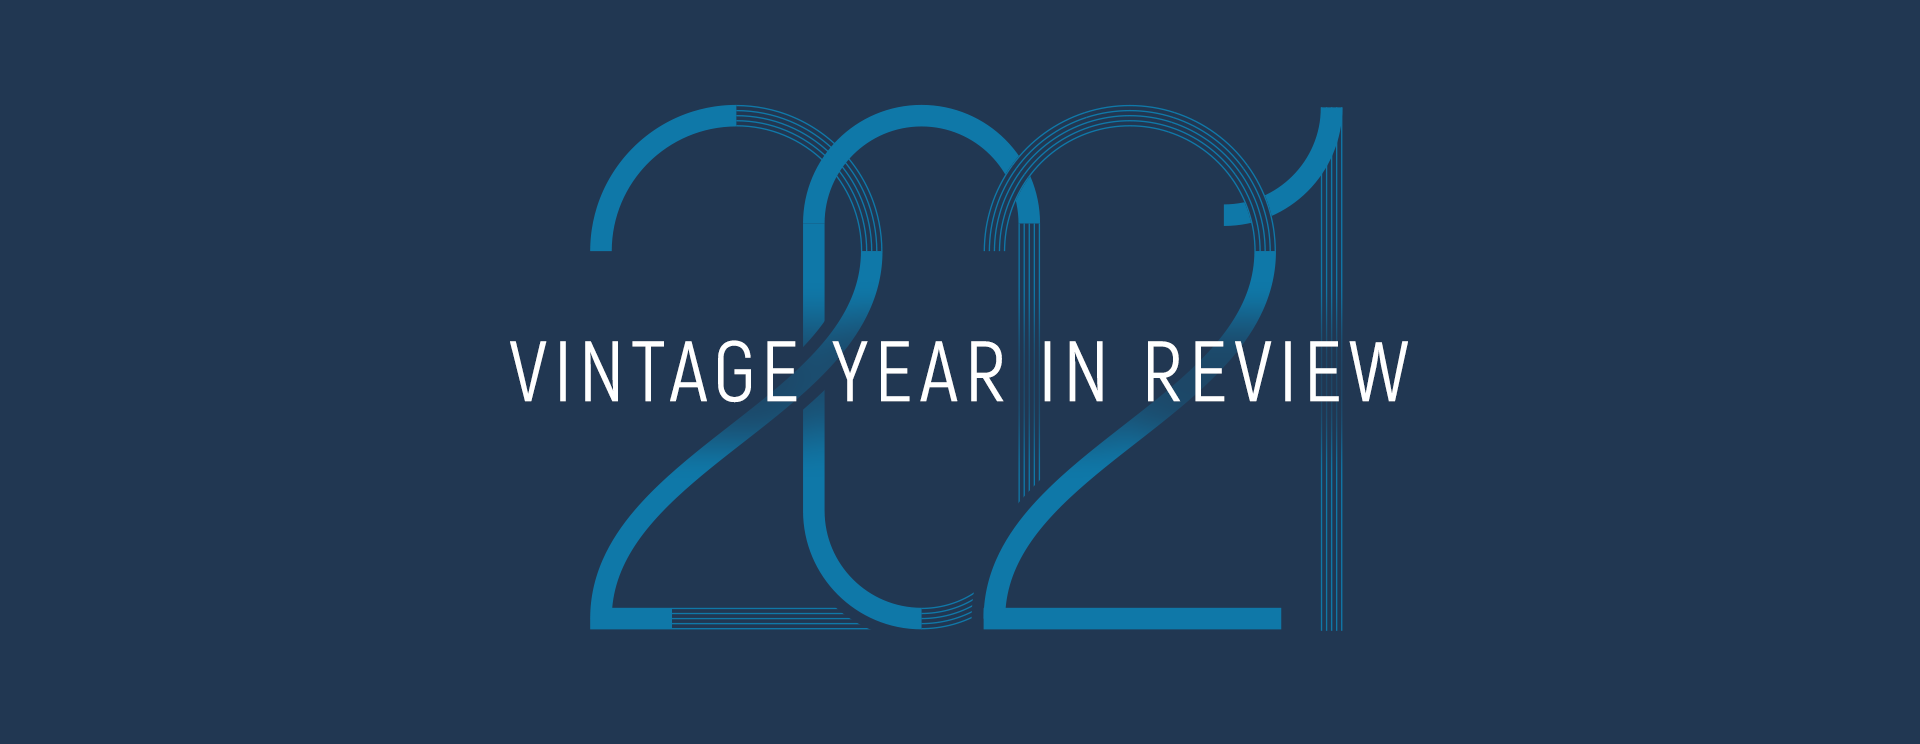 2021 Vintage Year in Review